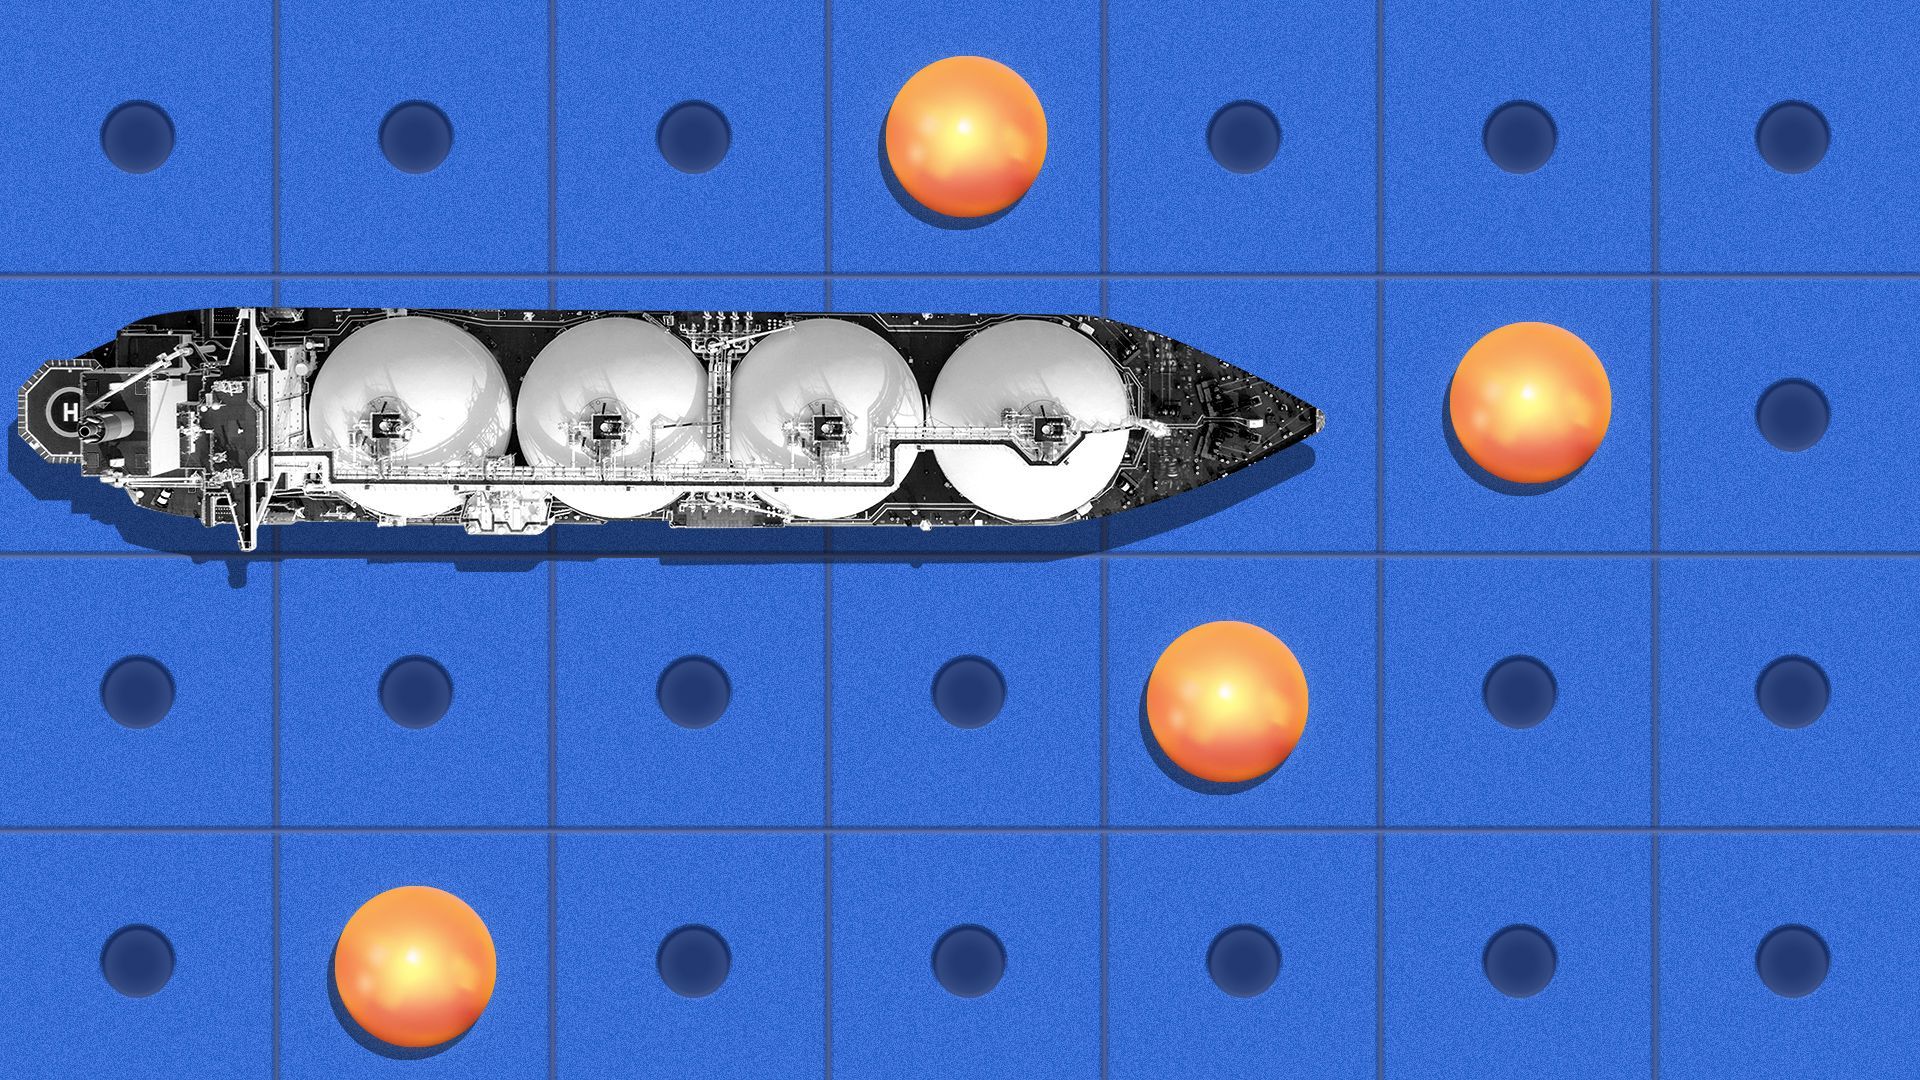 Illustration of a battleship style board game with a liquefied natural gas ship as one of the pieces, surrounded by orange hits just missing the ship. 